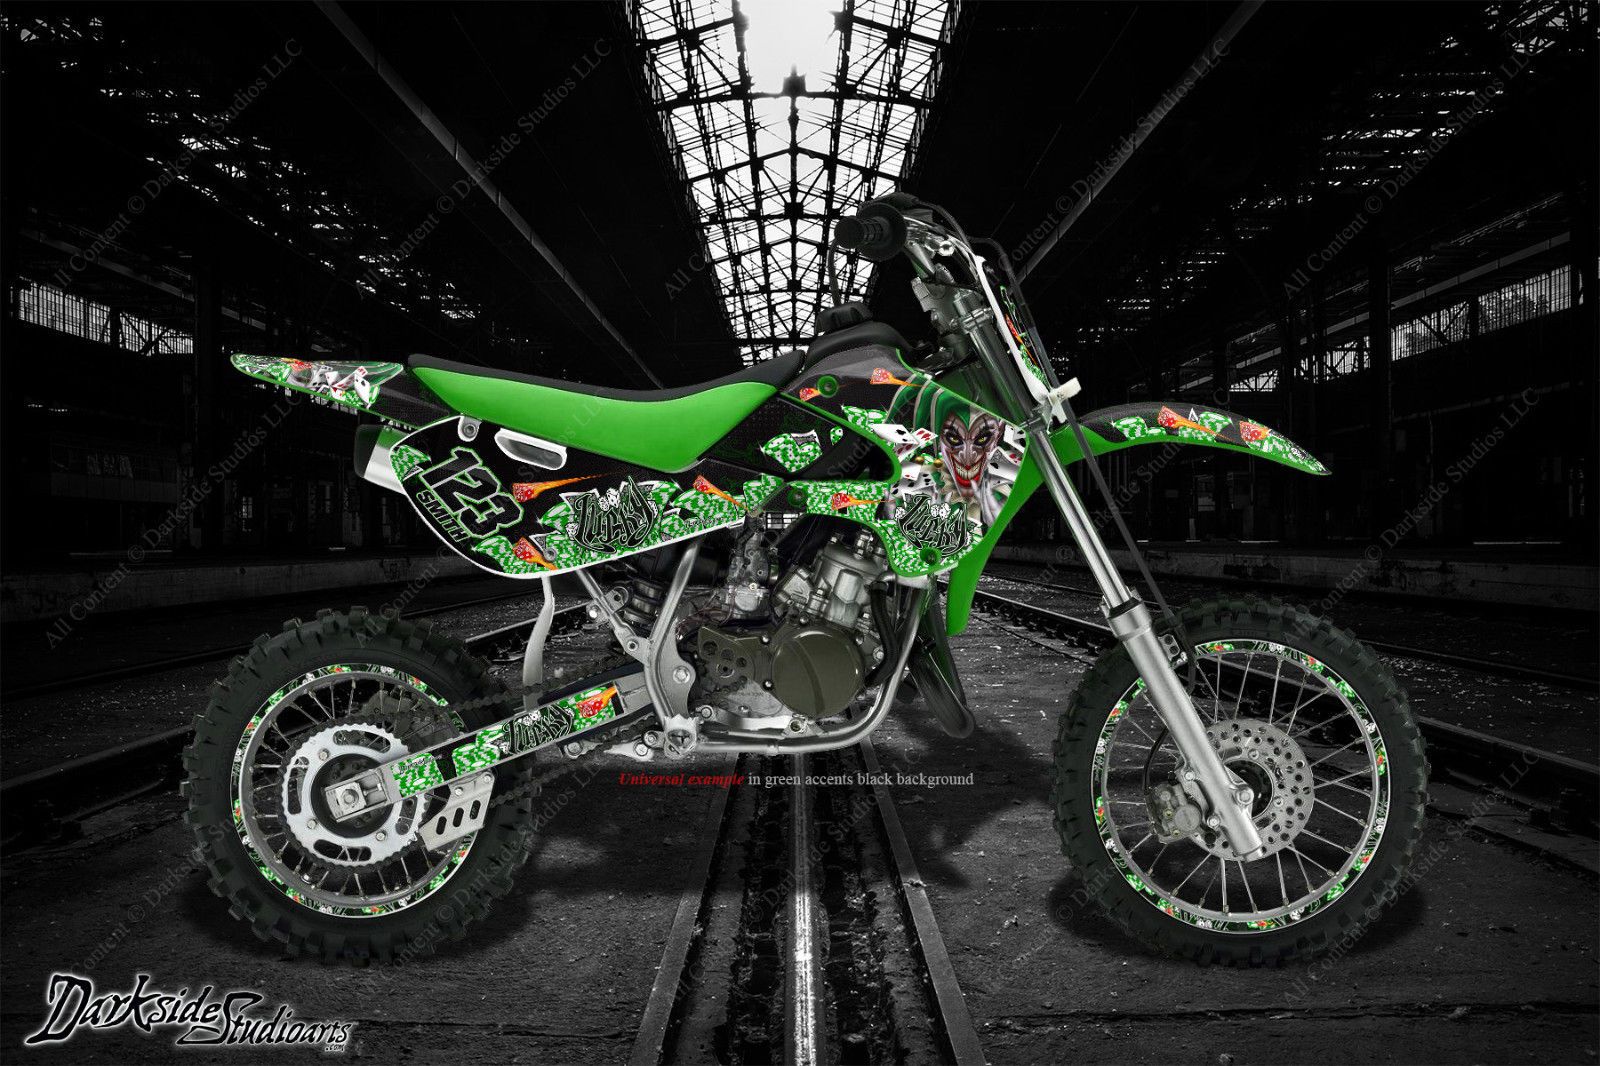 will a kx100 engine fit in a kx80 frame